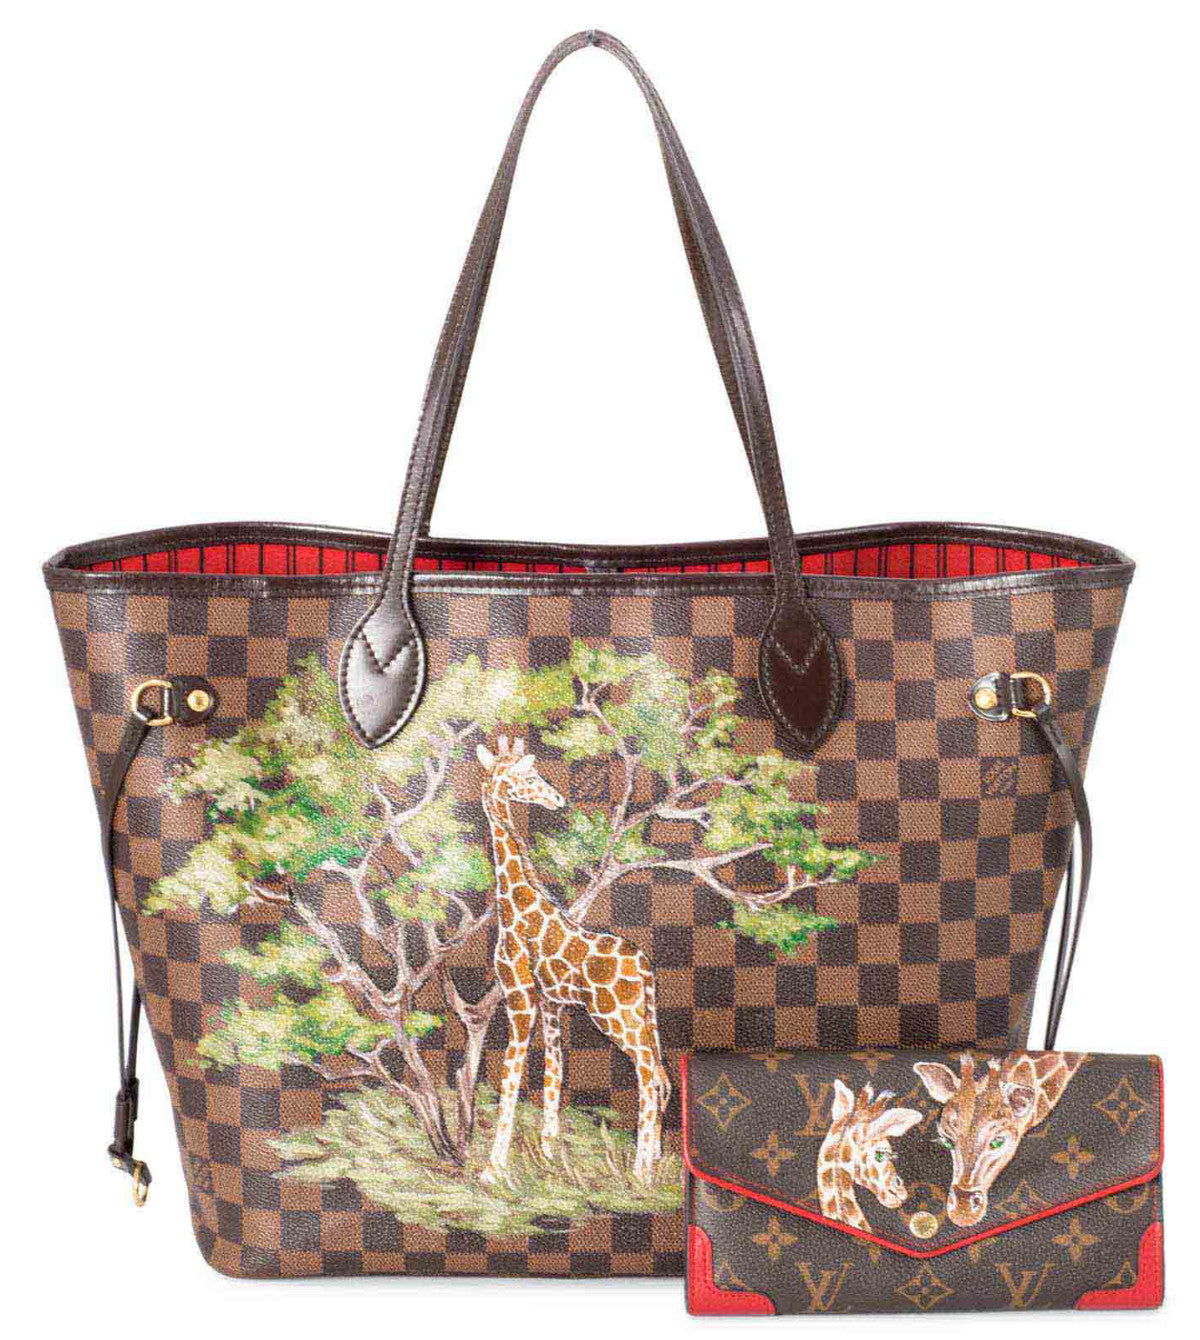 Custom Painting on LV or any branded bag. Louis Vuitton Custom Painted Bag.  PF only. Bag not included- Send in your bag for painting.